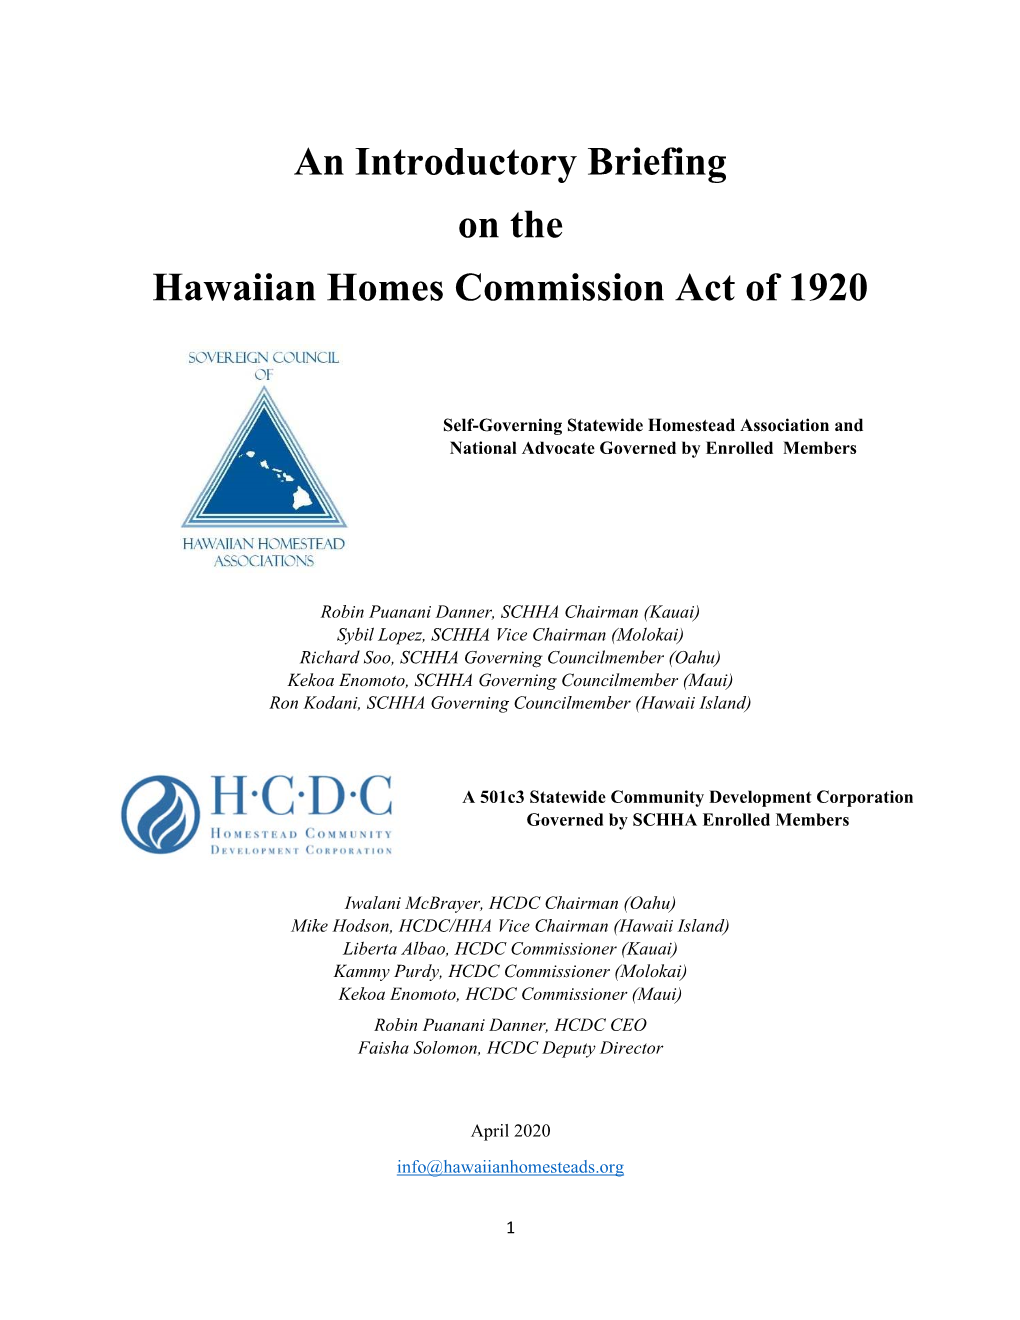 An Introductory Briefing on the Hawaiian Homes Commission Act of 1920